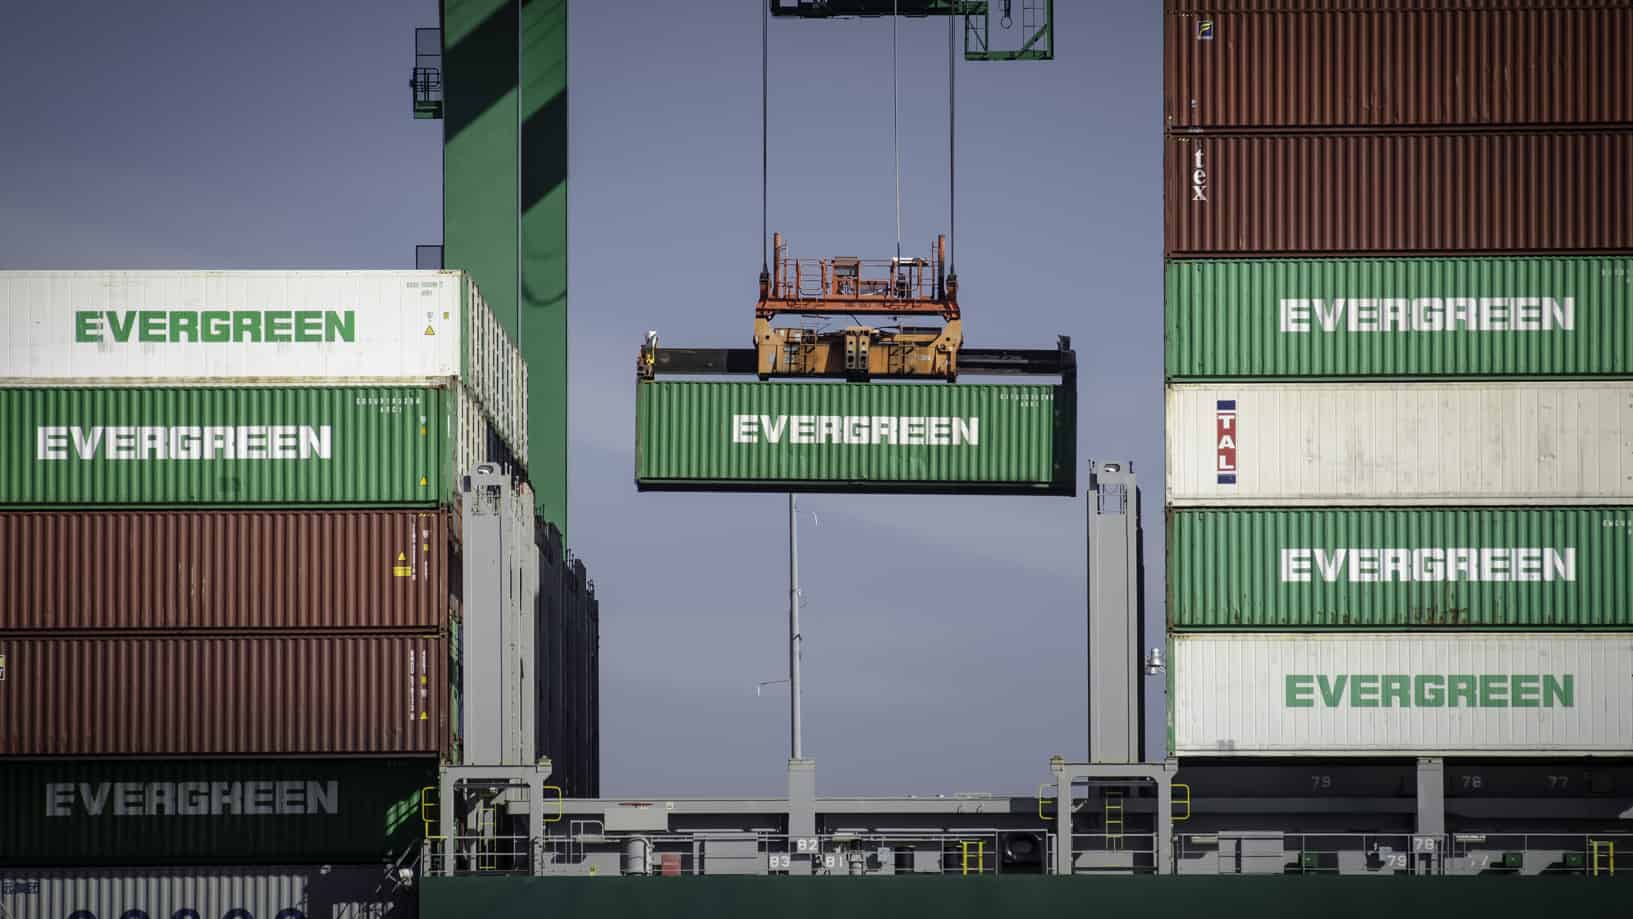 The business models behind container leasing in maritime freight market (Photo: Jim Allen/FreightWaves)